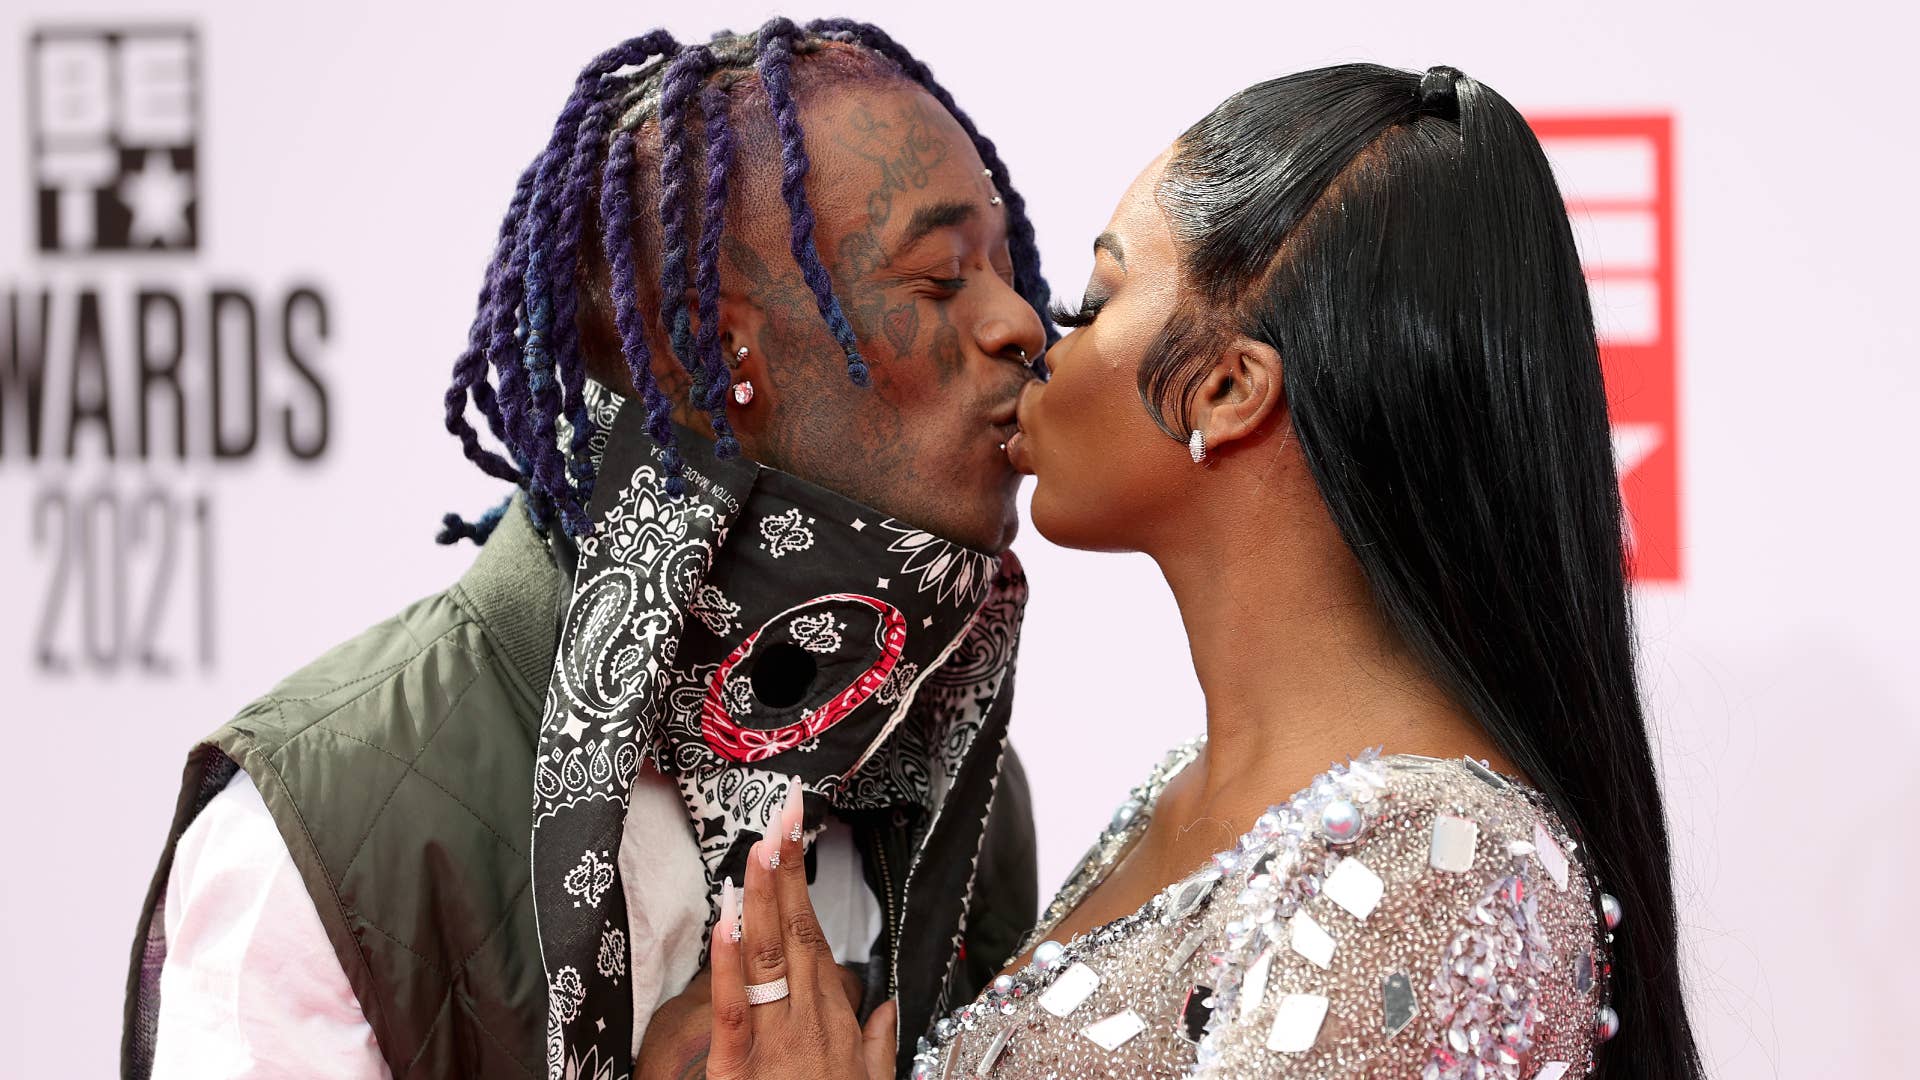 Lil Uzi Vert and JT are seen on the red carpet